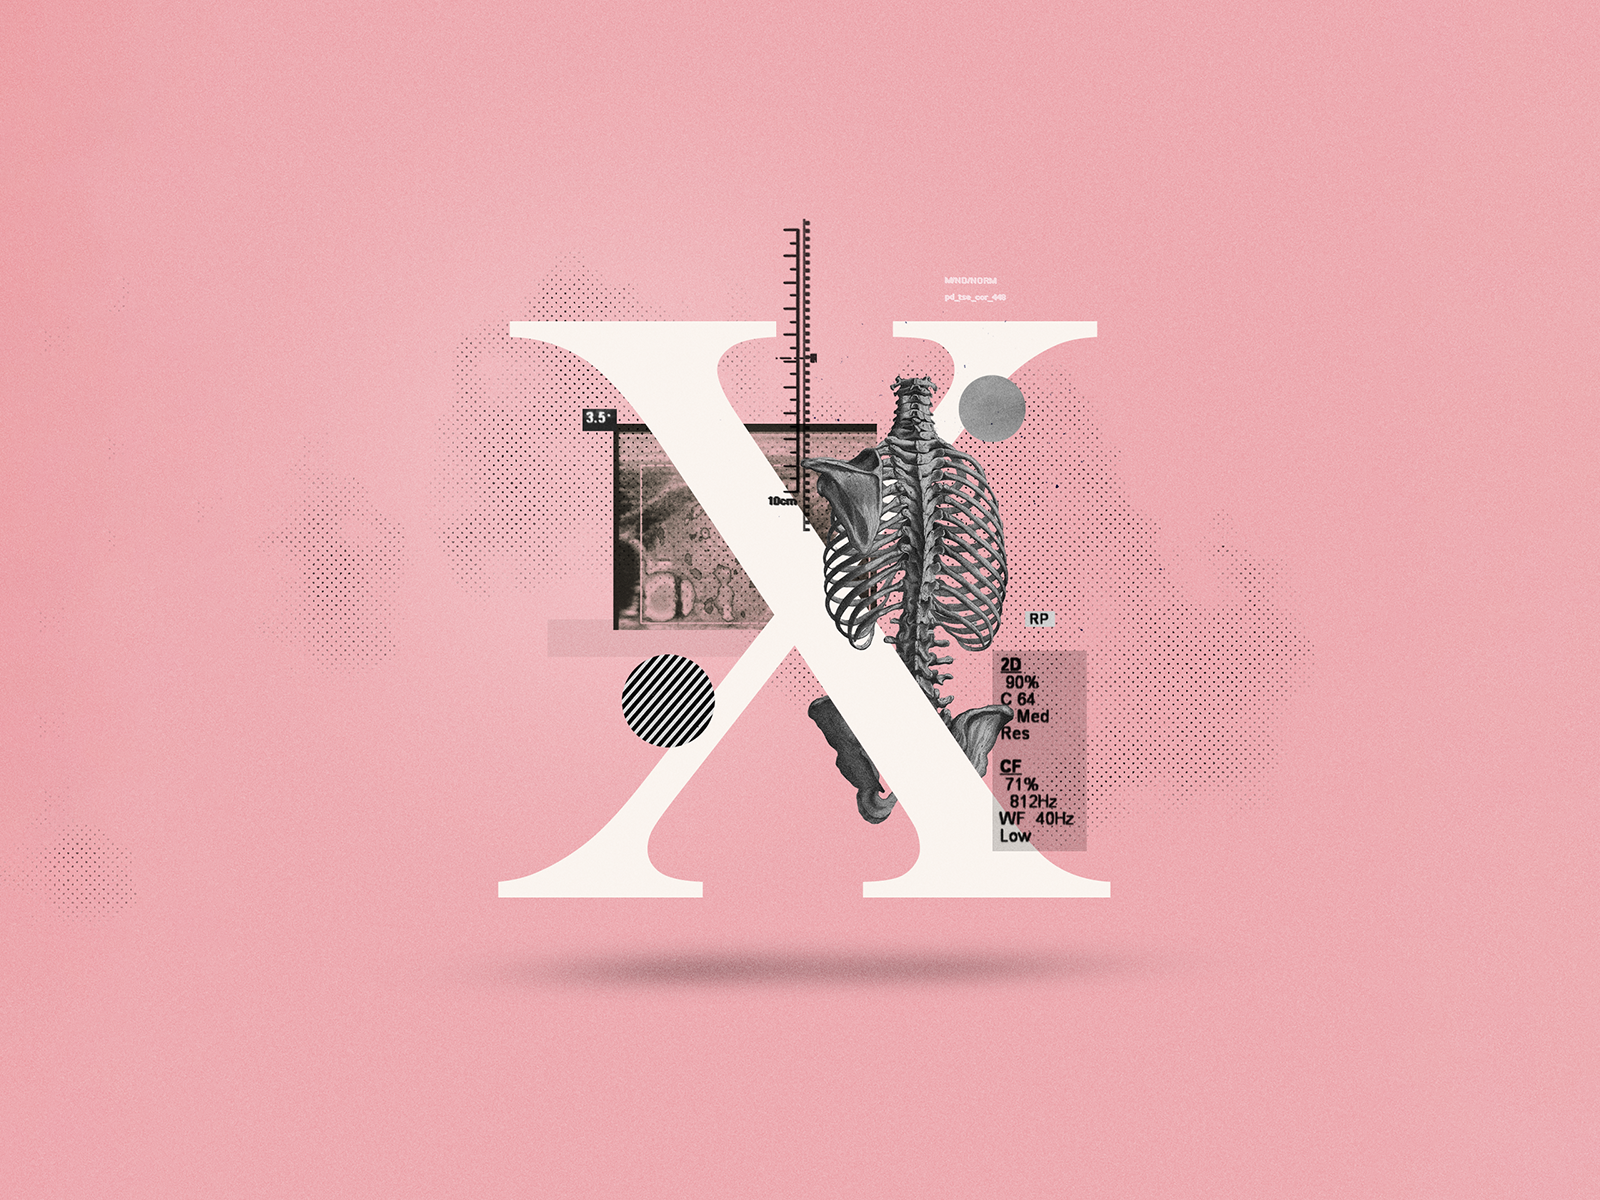 X - Xray by Tommaso D'Angelosante on Dribbble